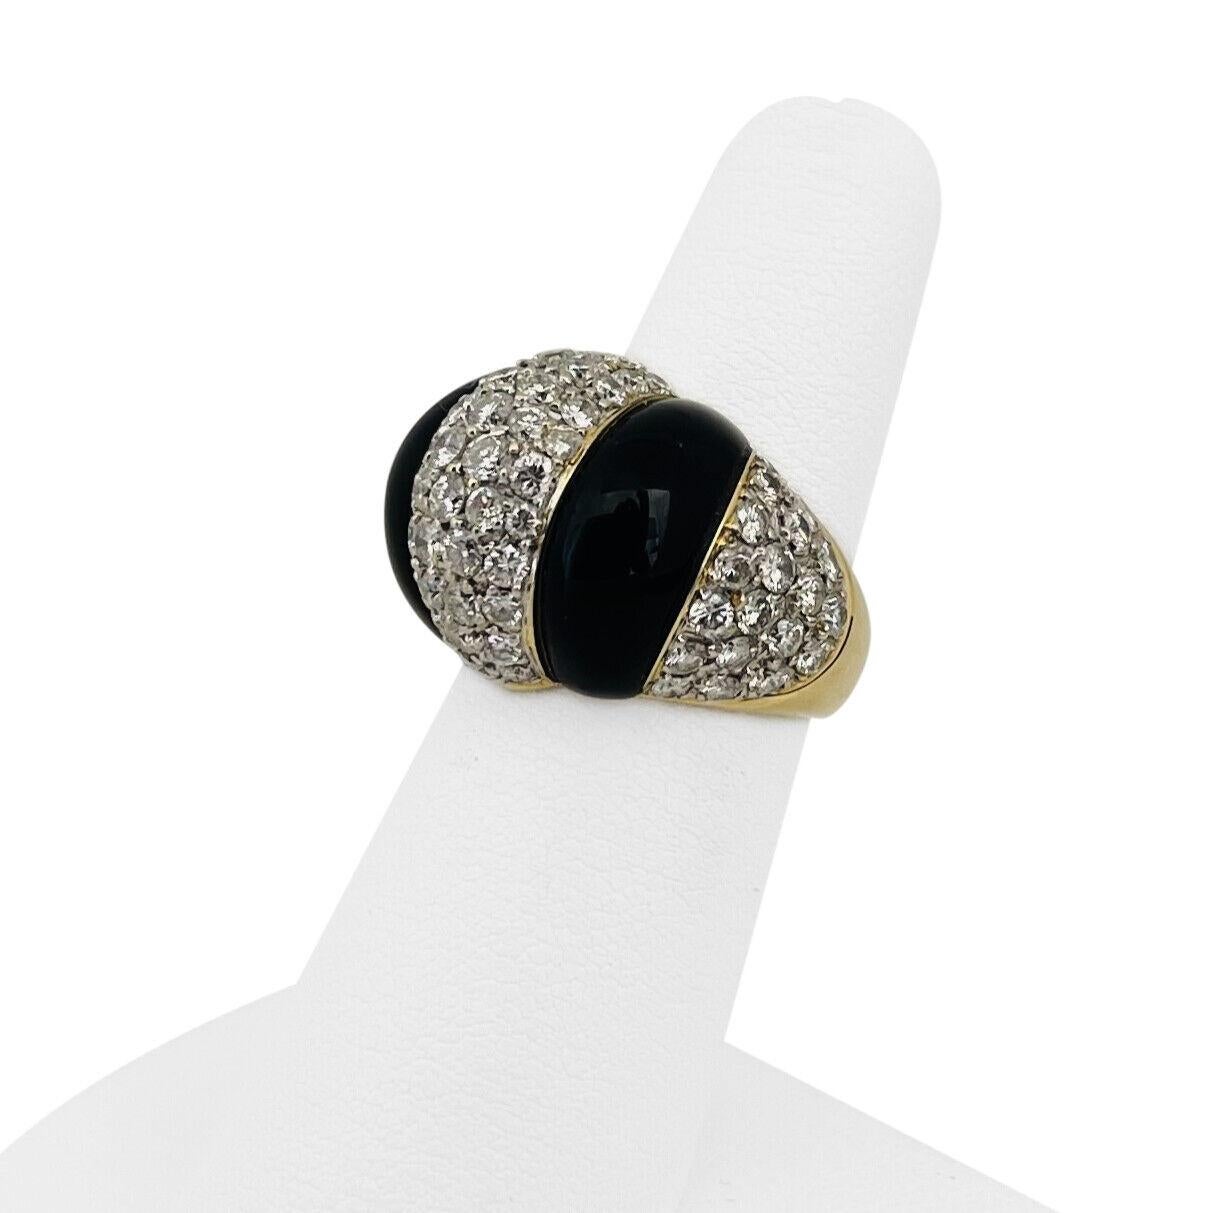 18k Yellow Gold Onyx and 3ct Diamond Bombe Ring Size 5.25

Condition:  Excellent Condition, Professionally Cleaned and Polished
Metal:  18k Gold (Marked, and Professionally Tested)
Weight:  11.7g
Gemstone:  Black Onyx
Diamonds:  3cttw Round